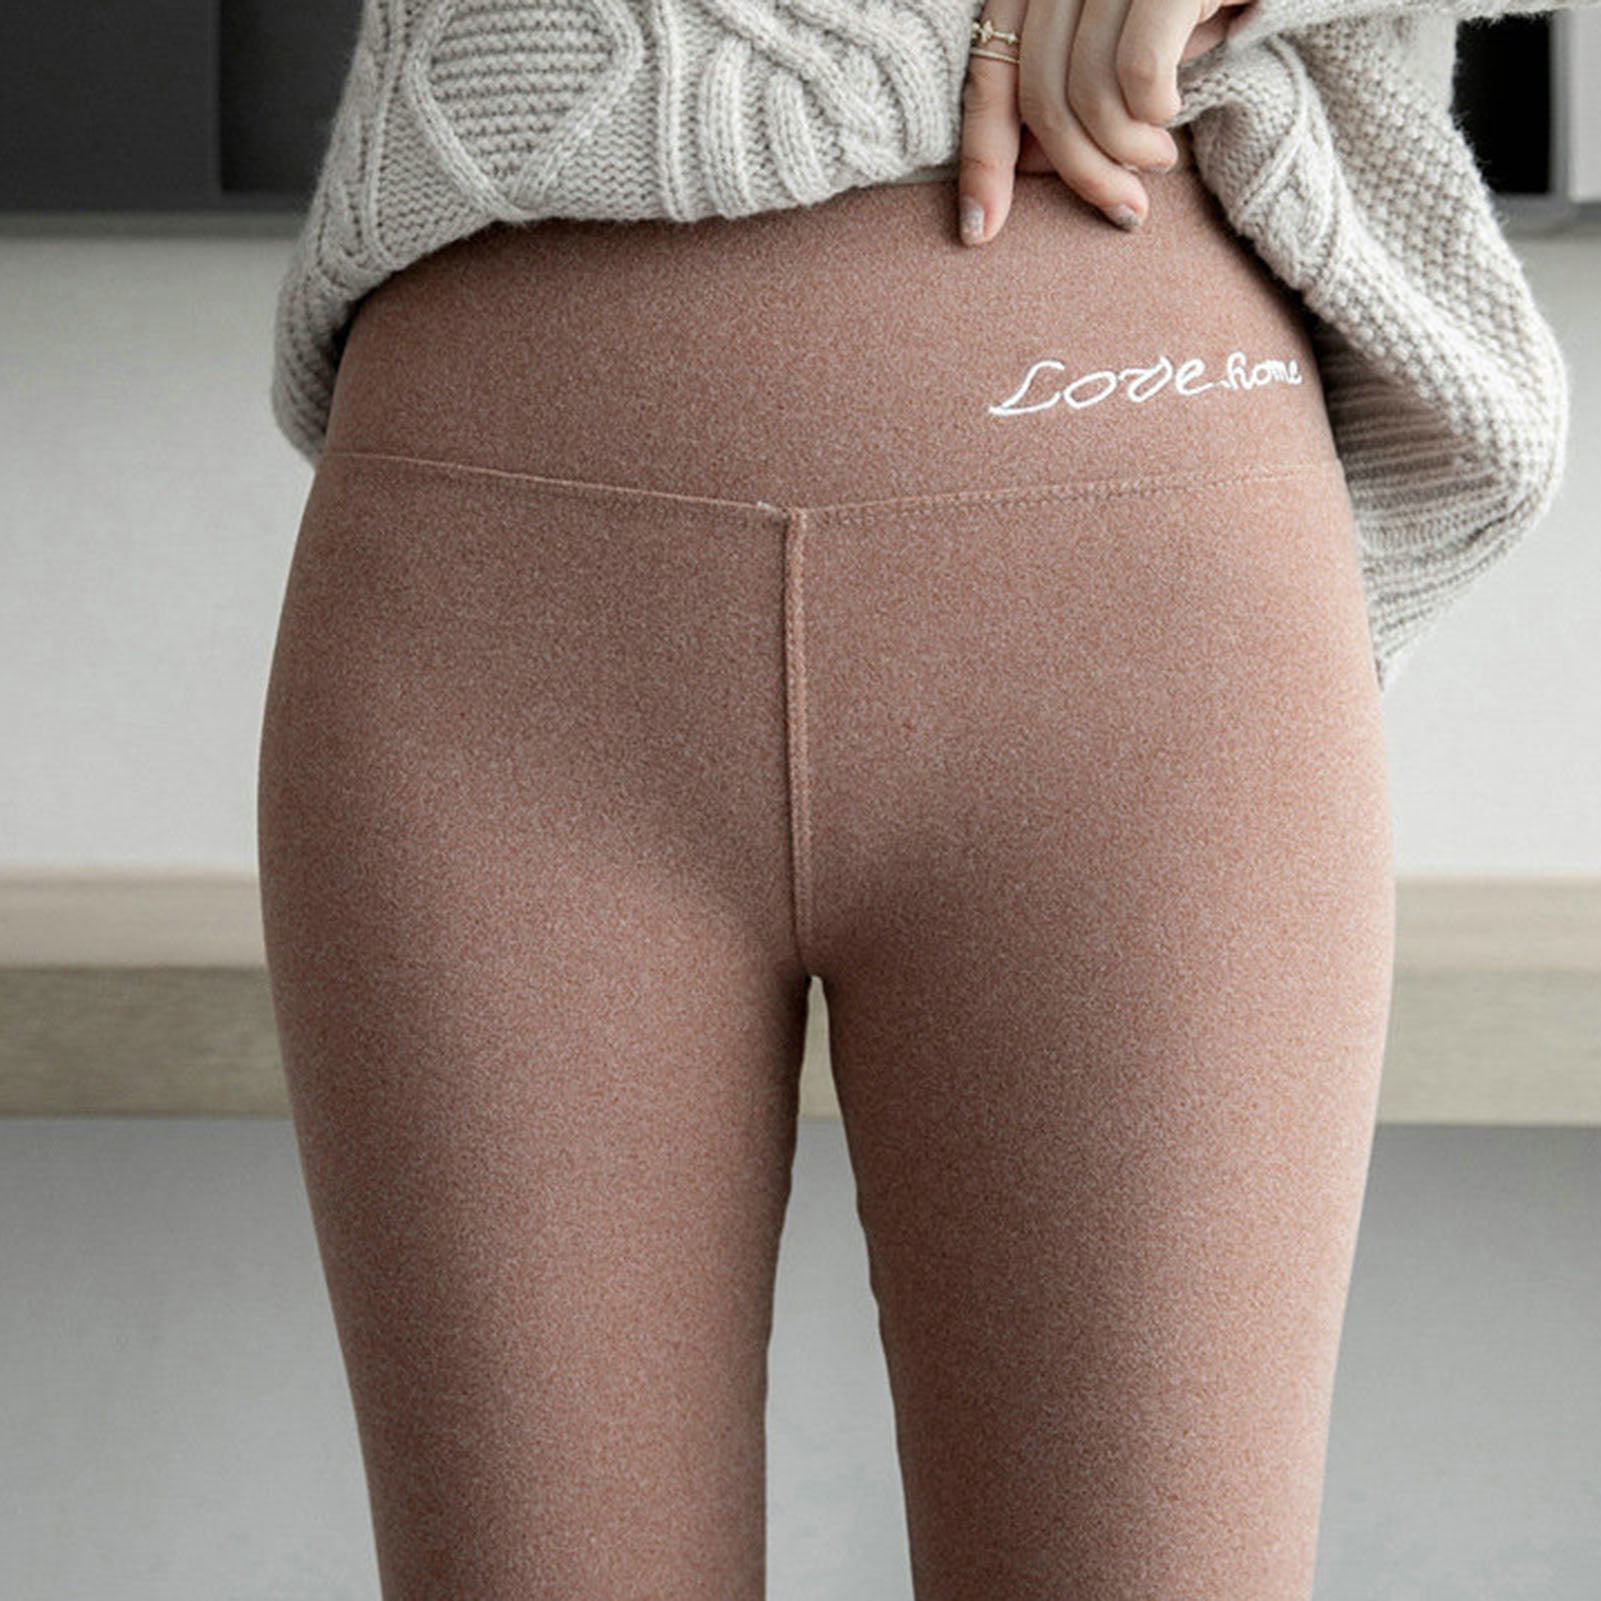 Fleece Lined Leggings Women Winter Warm Thick Tights Thermal Velvet Pants  Tummy Control Soft Stretchy 